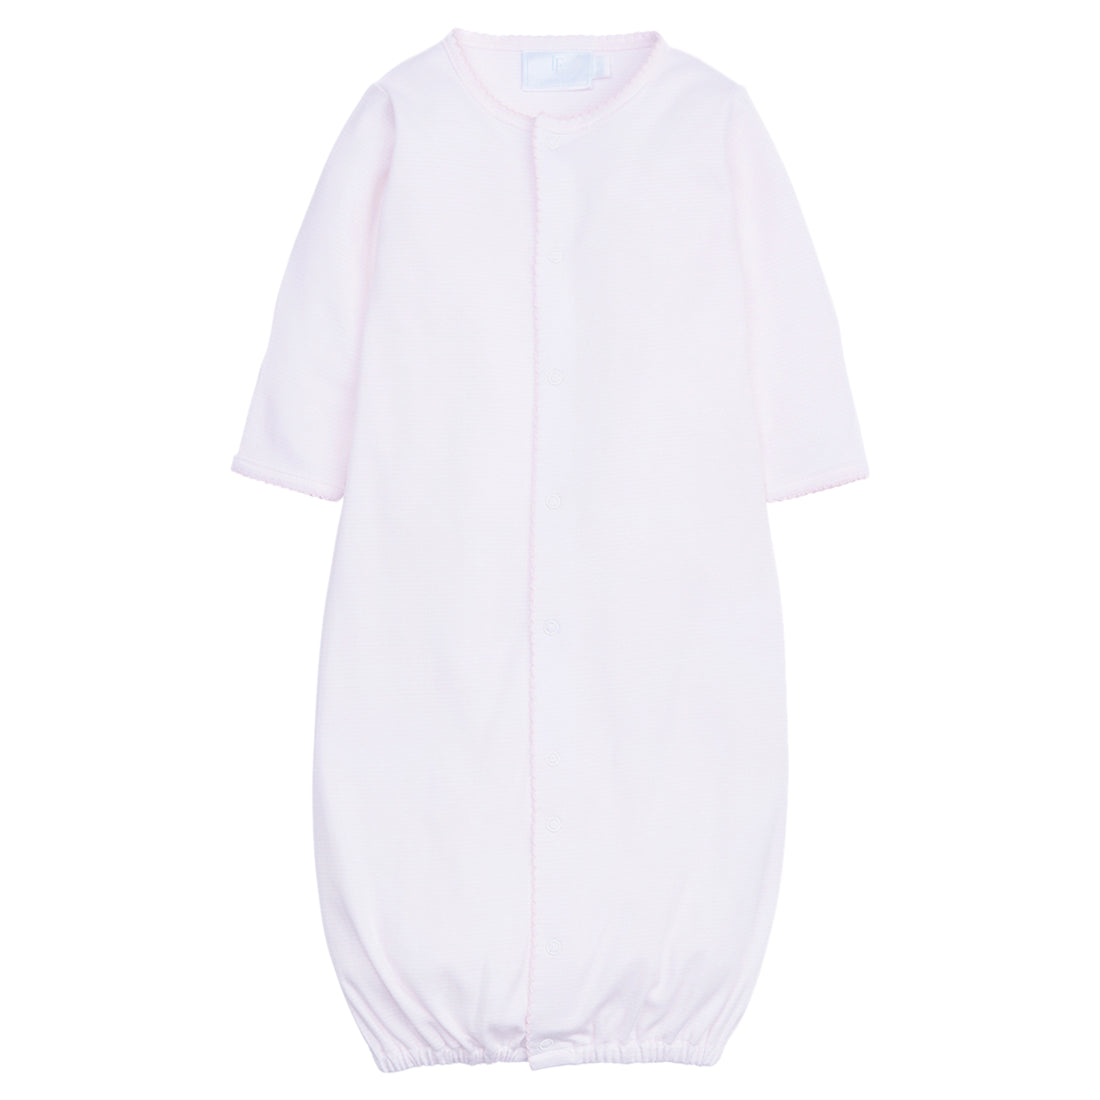 classic childrens clothing baby girl sleep gown in pink and white stripes